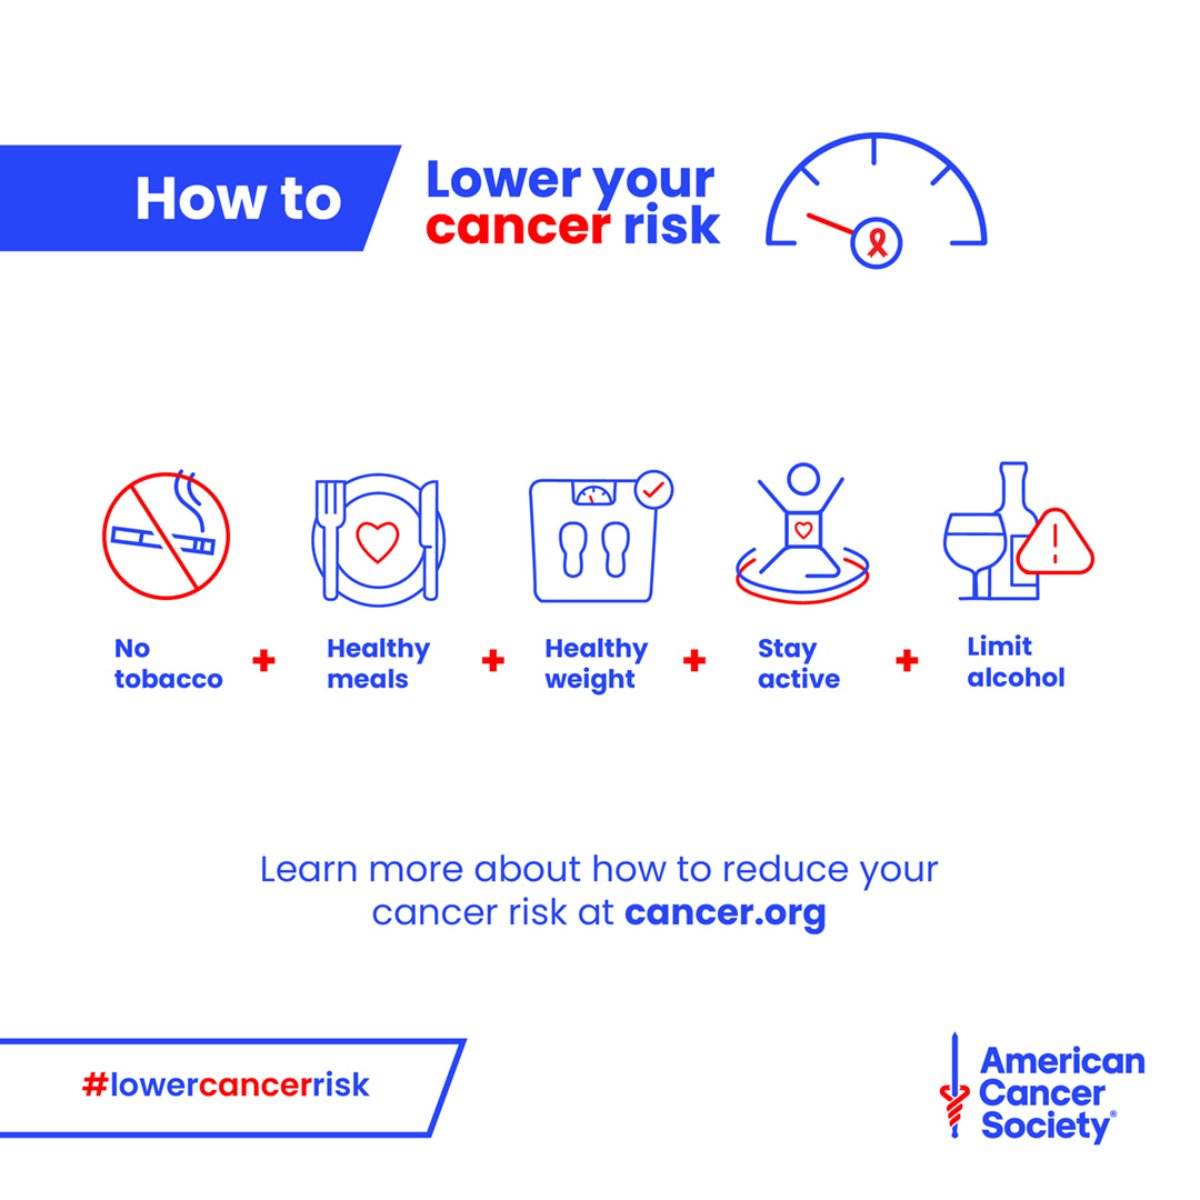 Avoiding tobacco is the number one way to lower your cancer risk. But eating right, maintaining a healthy weight, staying active, and avoiding or limiting alcohol are other great ways to lower your risk of cancer. Learn more at cancer.org.